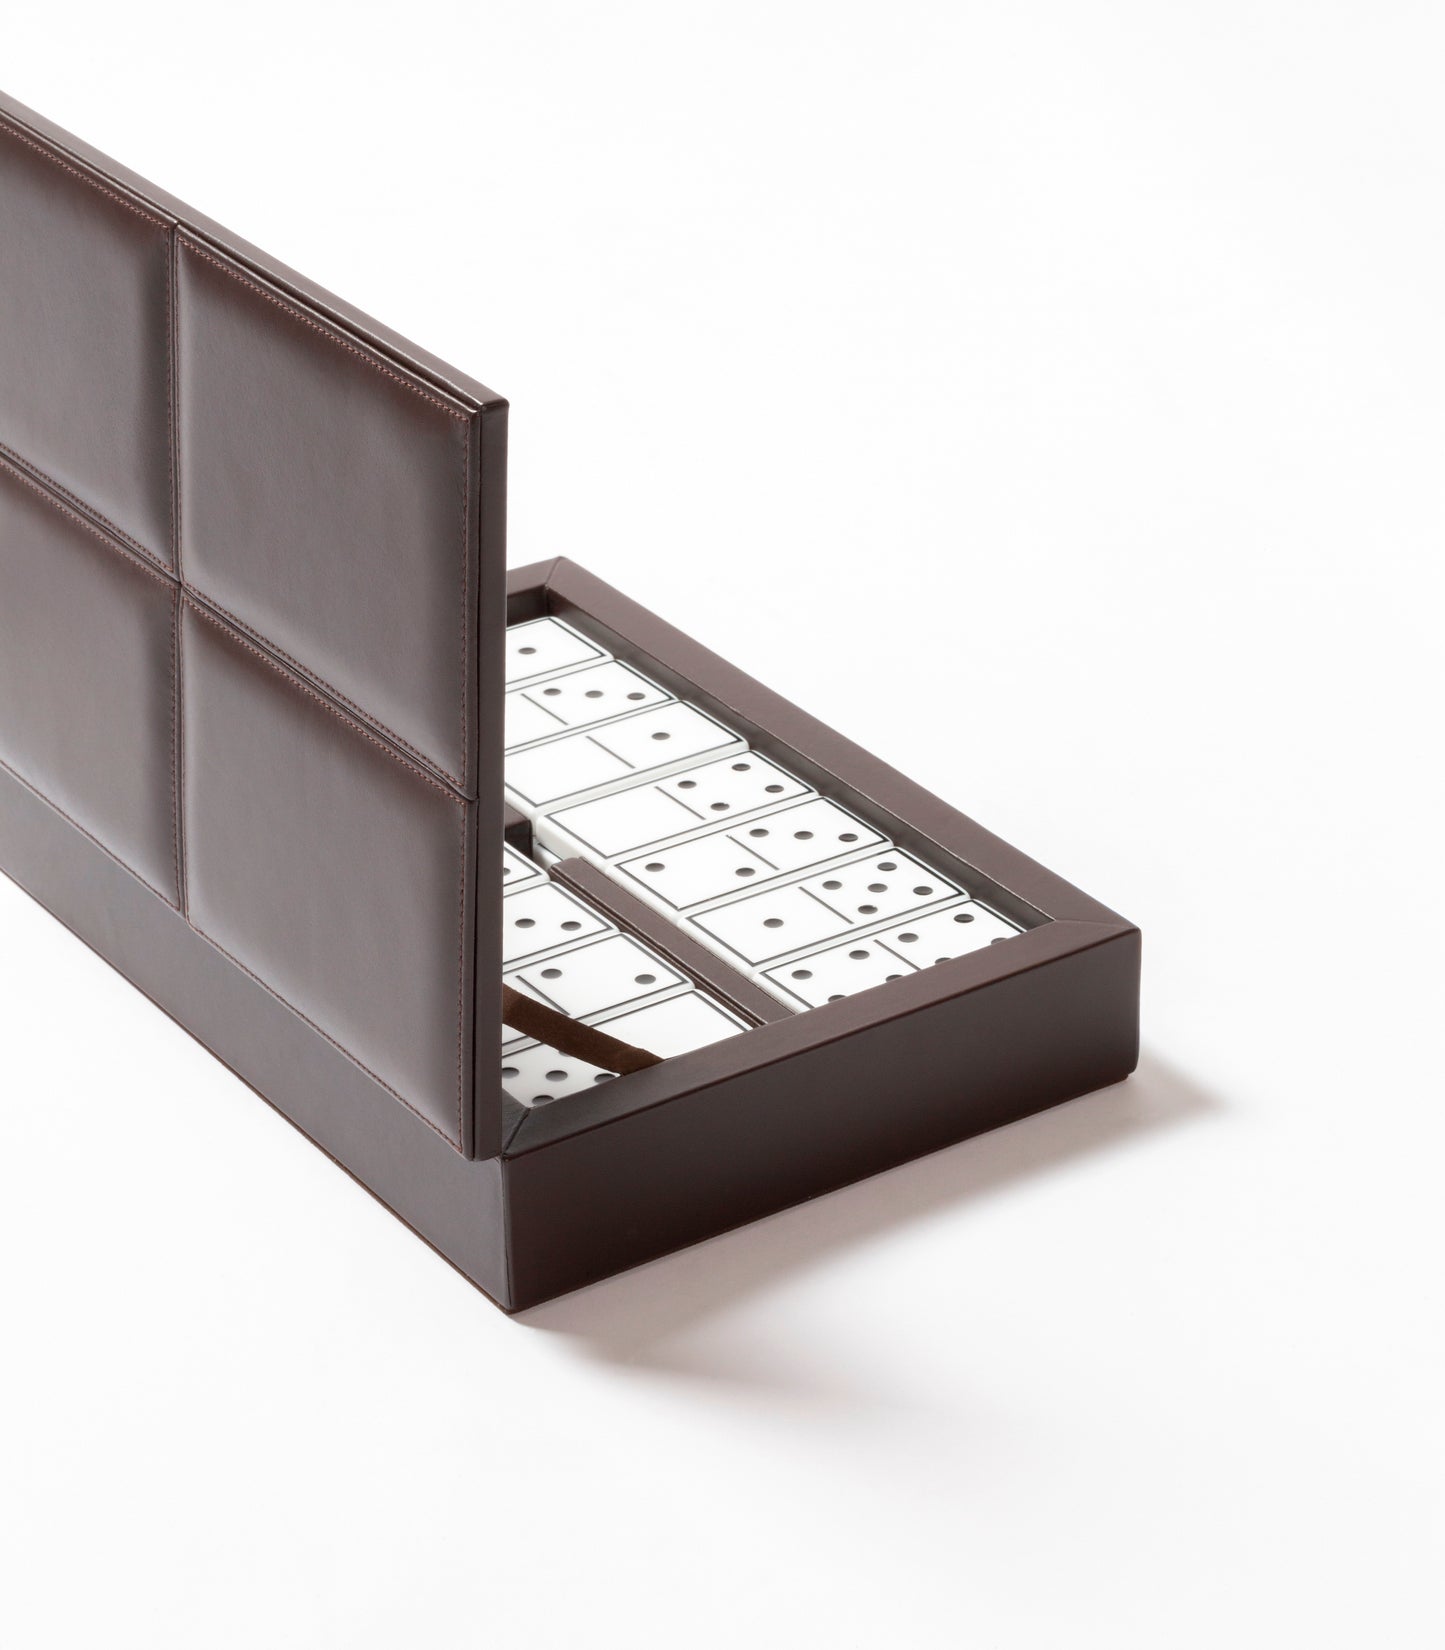 Riviere Eva Classic Domino Game Set in Leather Box With Stitched Padded Finish | Stylish Design with Padded Leather Lid | Set Equipped with Highly Resistant Glossy Plexiglass Domino Pieces | Choose Between Black or White Finish | Explore Luxury Domino Game Sets at 2Jour Concierge, #1 luxury high-end gift & lifestyle shop